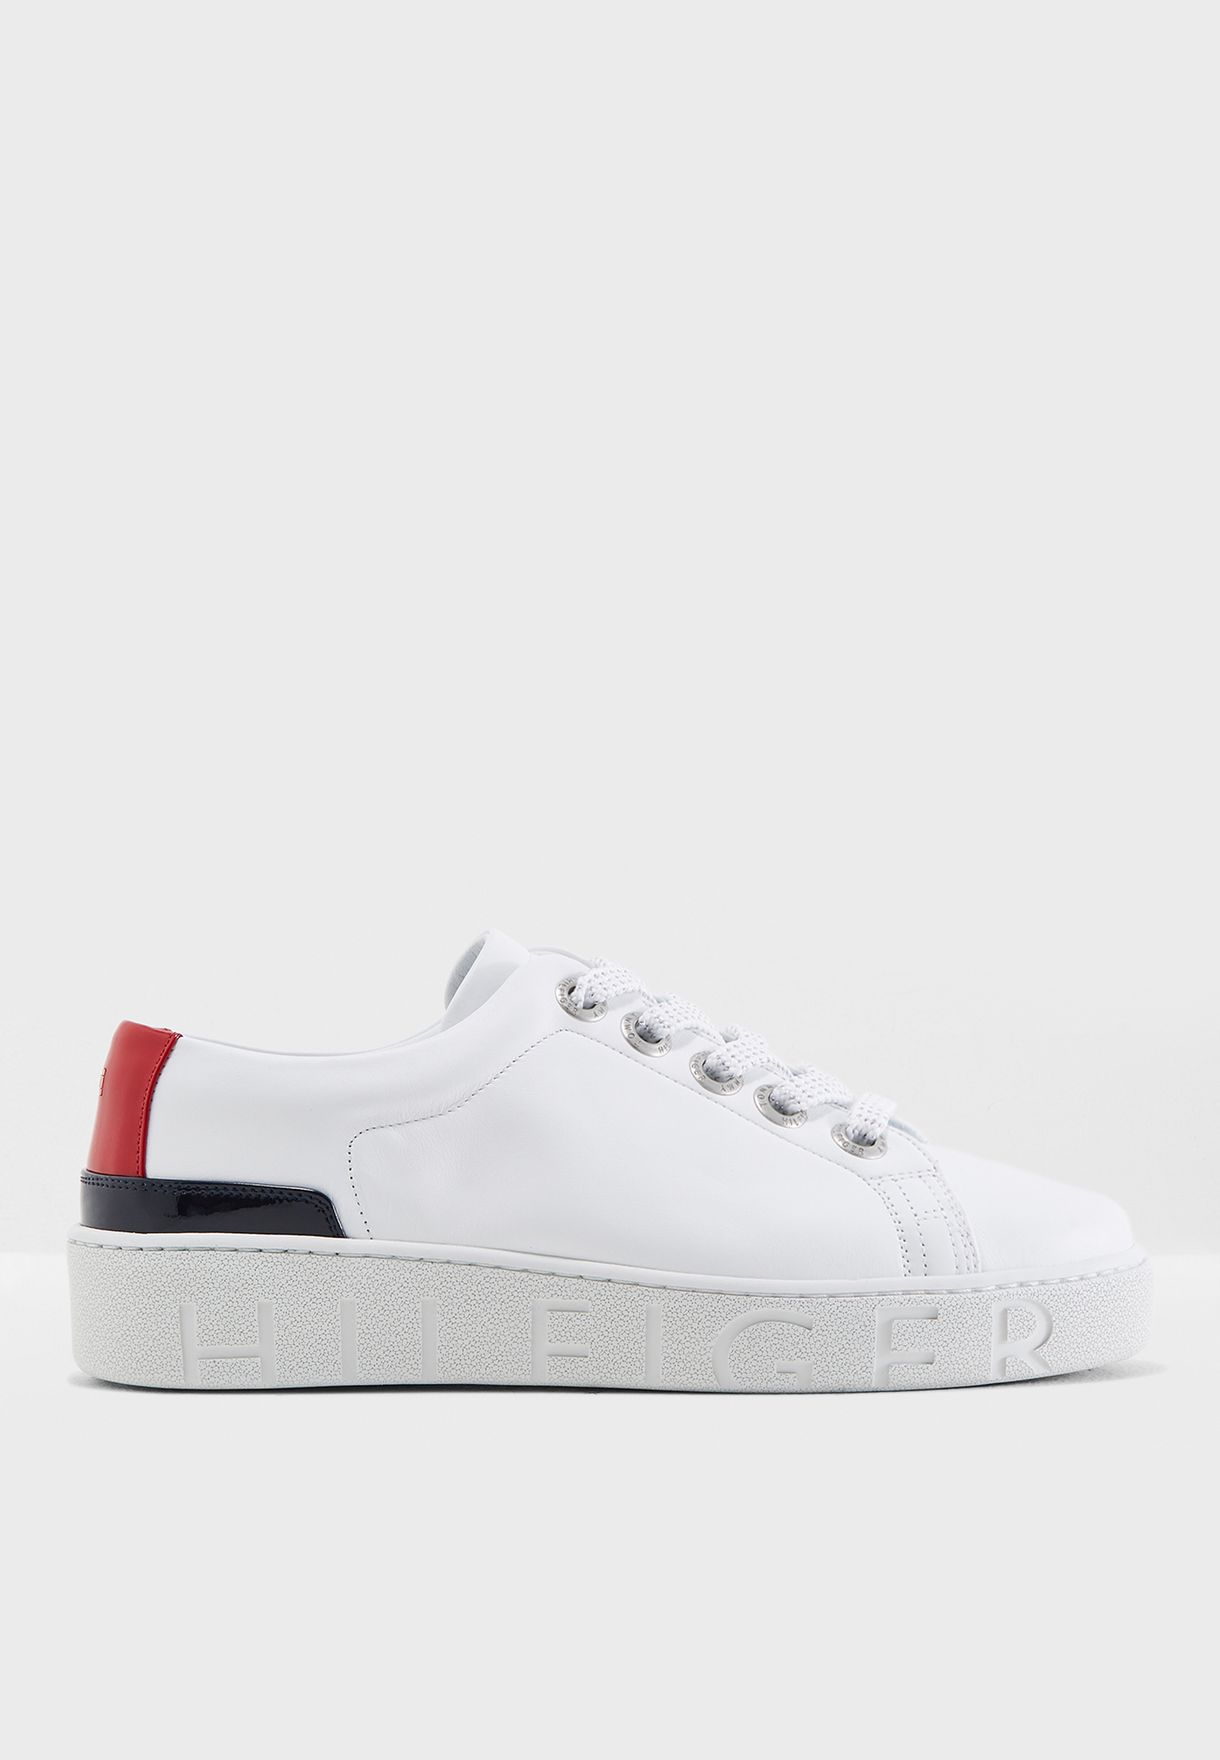 tommy hilfiger fashion sneakers